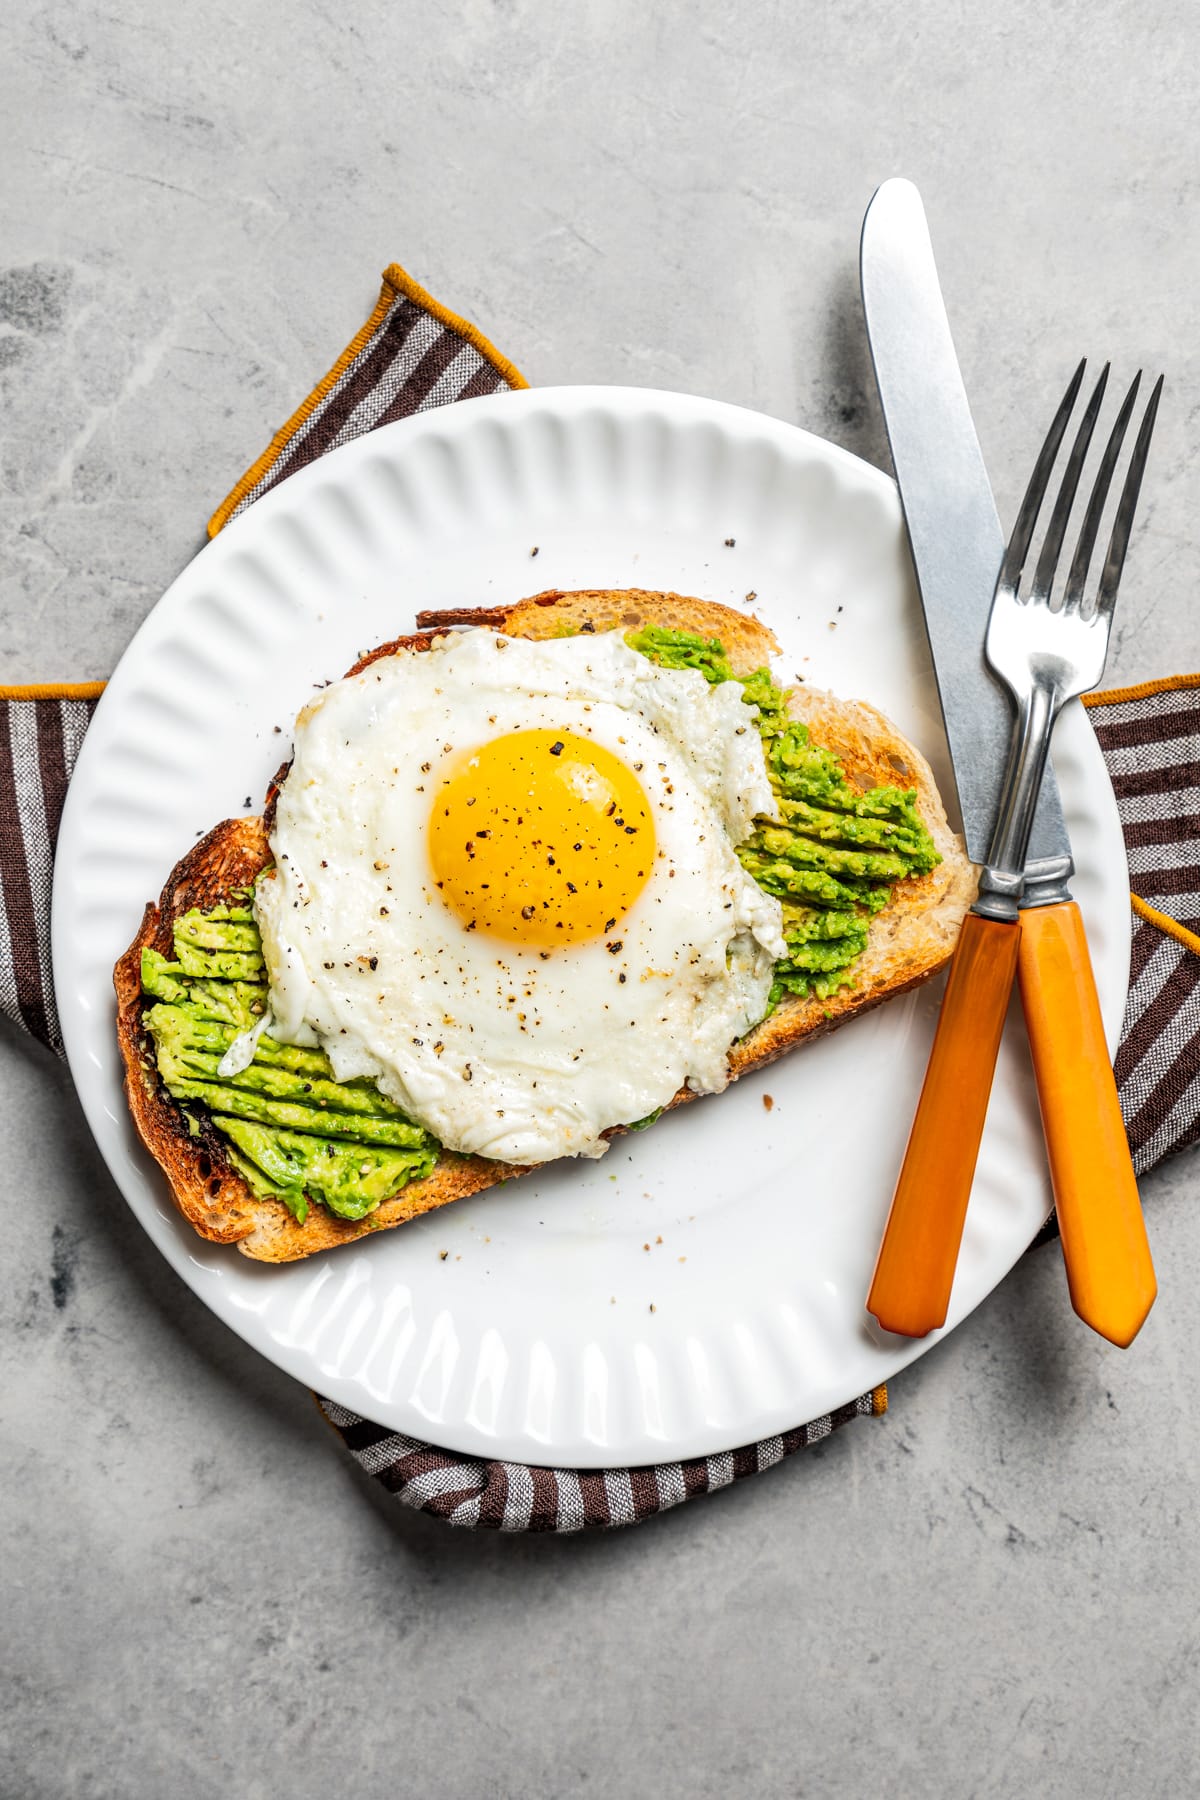 Avocado toast with an egg on top on a plate with a fork and knife.